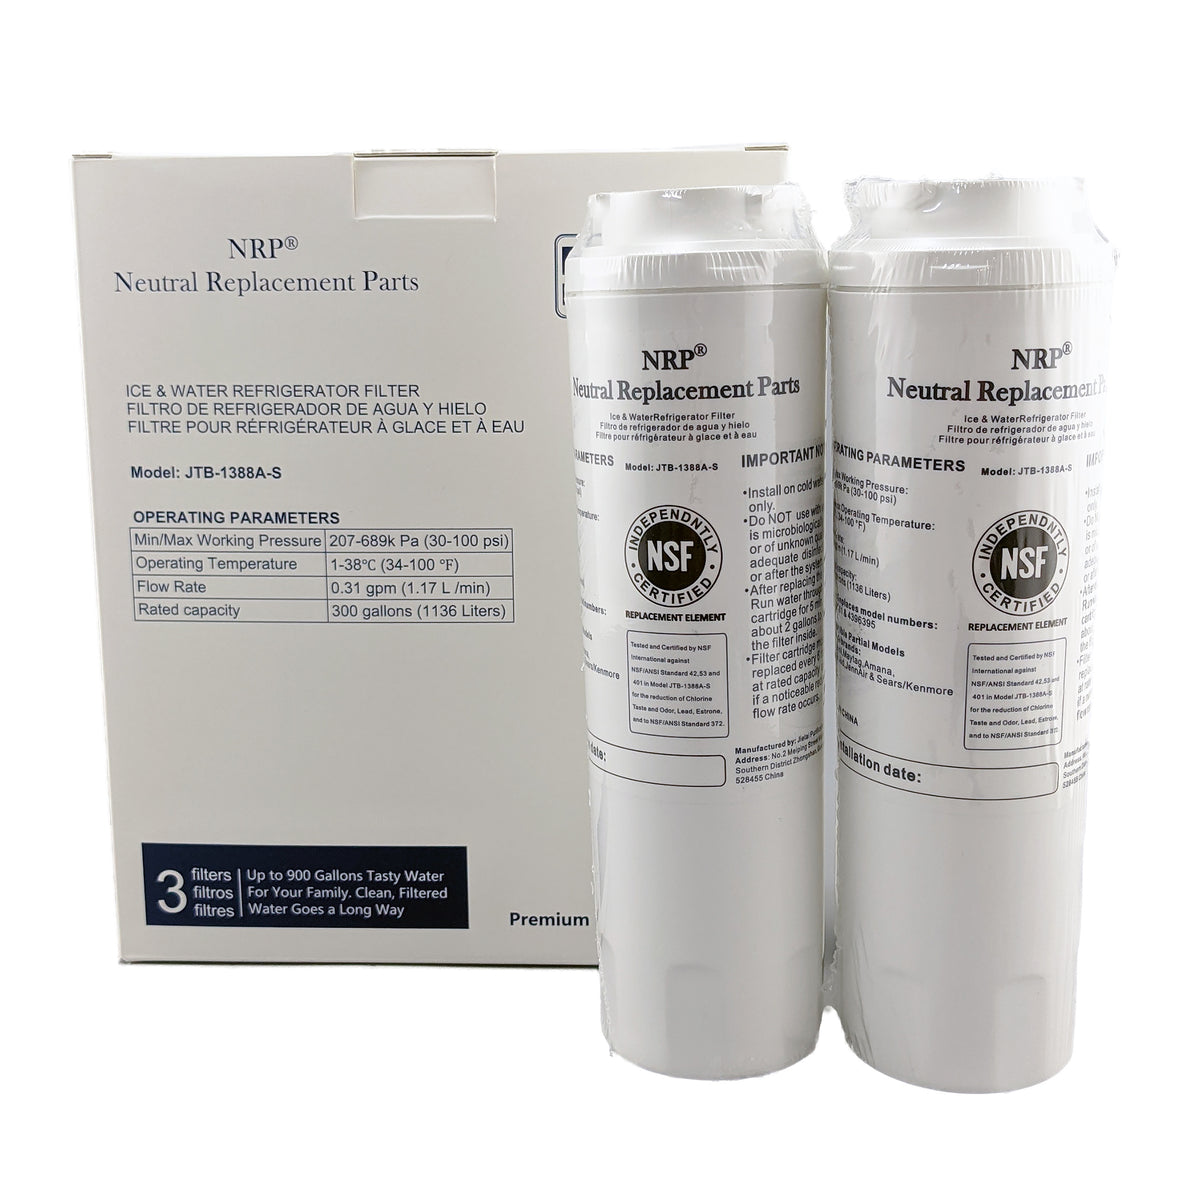 NSF 42/53/401 Certified Amana & More NRP 3-Pack Premium UKF8001 Replacement Refrigerator Water Filter Compatible for Whirlpool Kitchen-Aid 